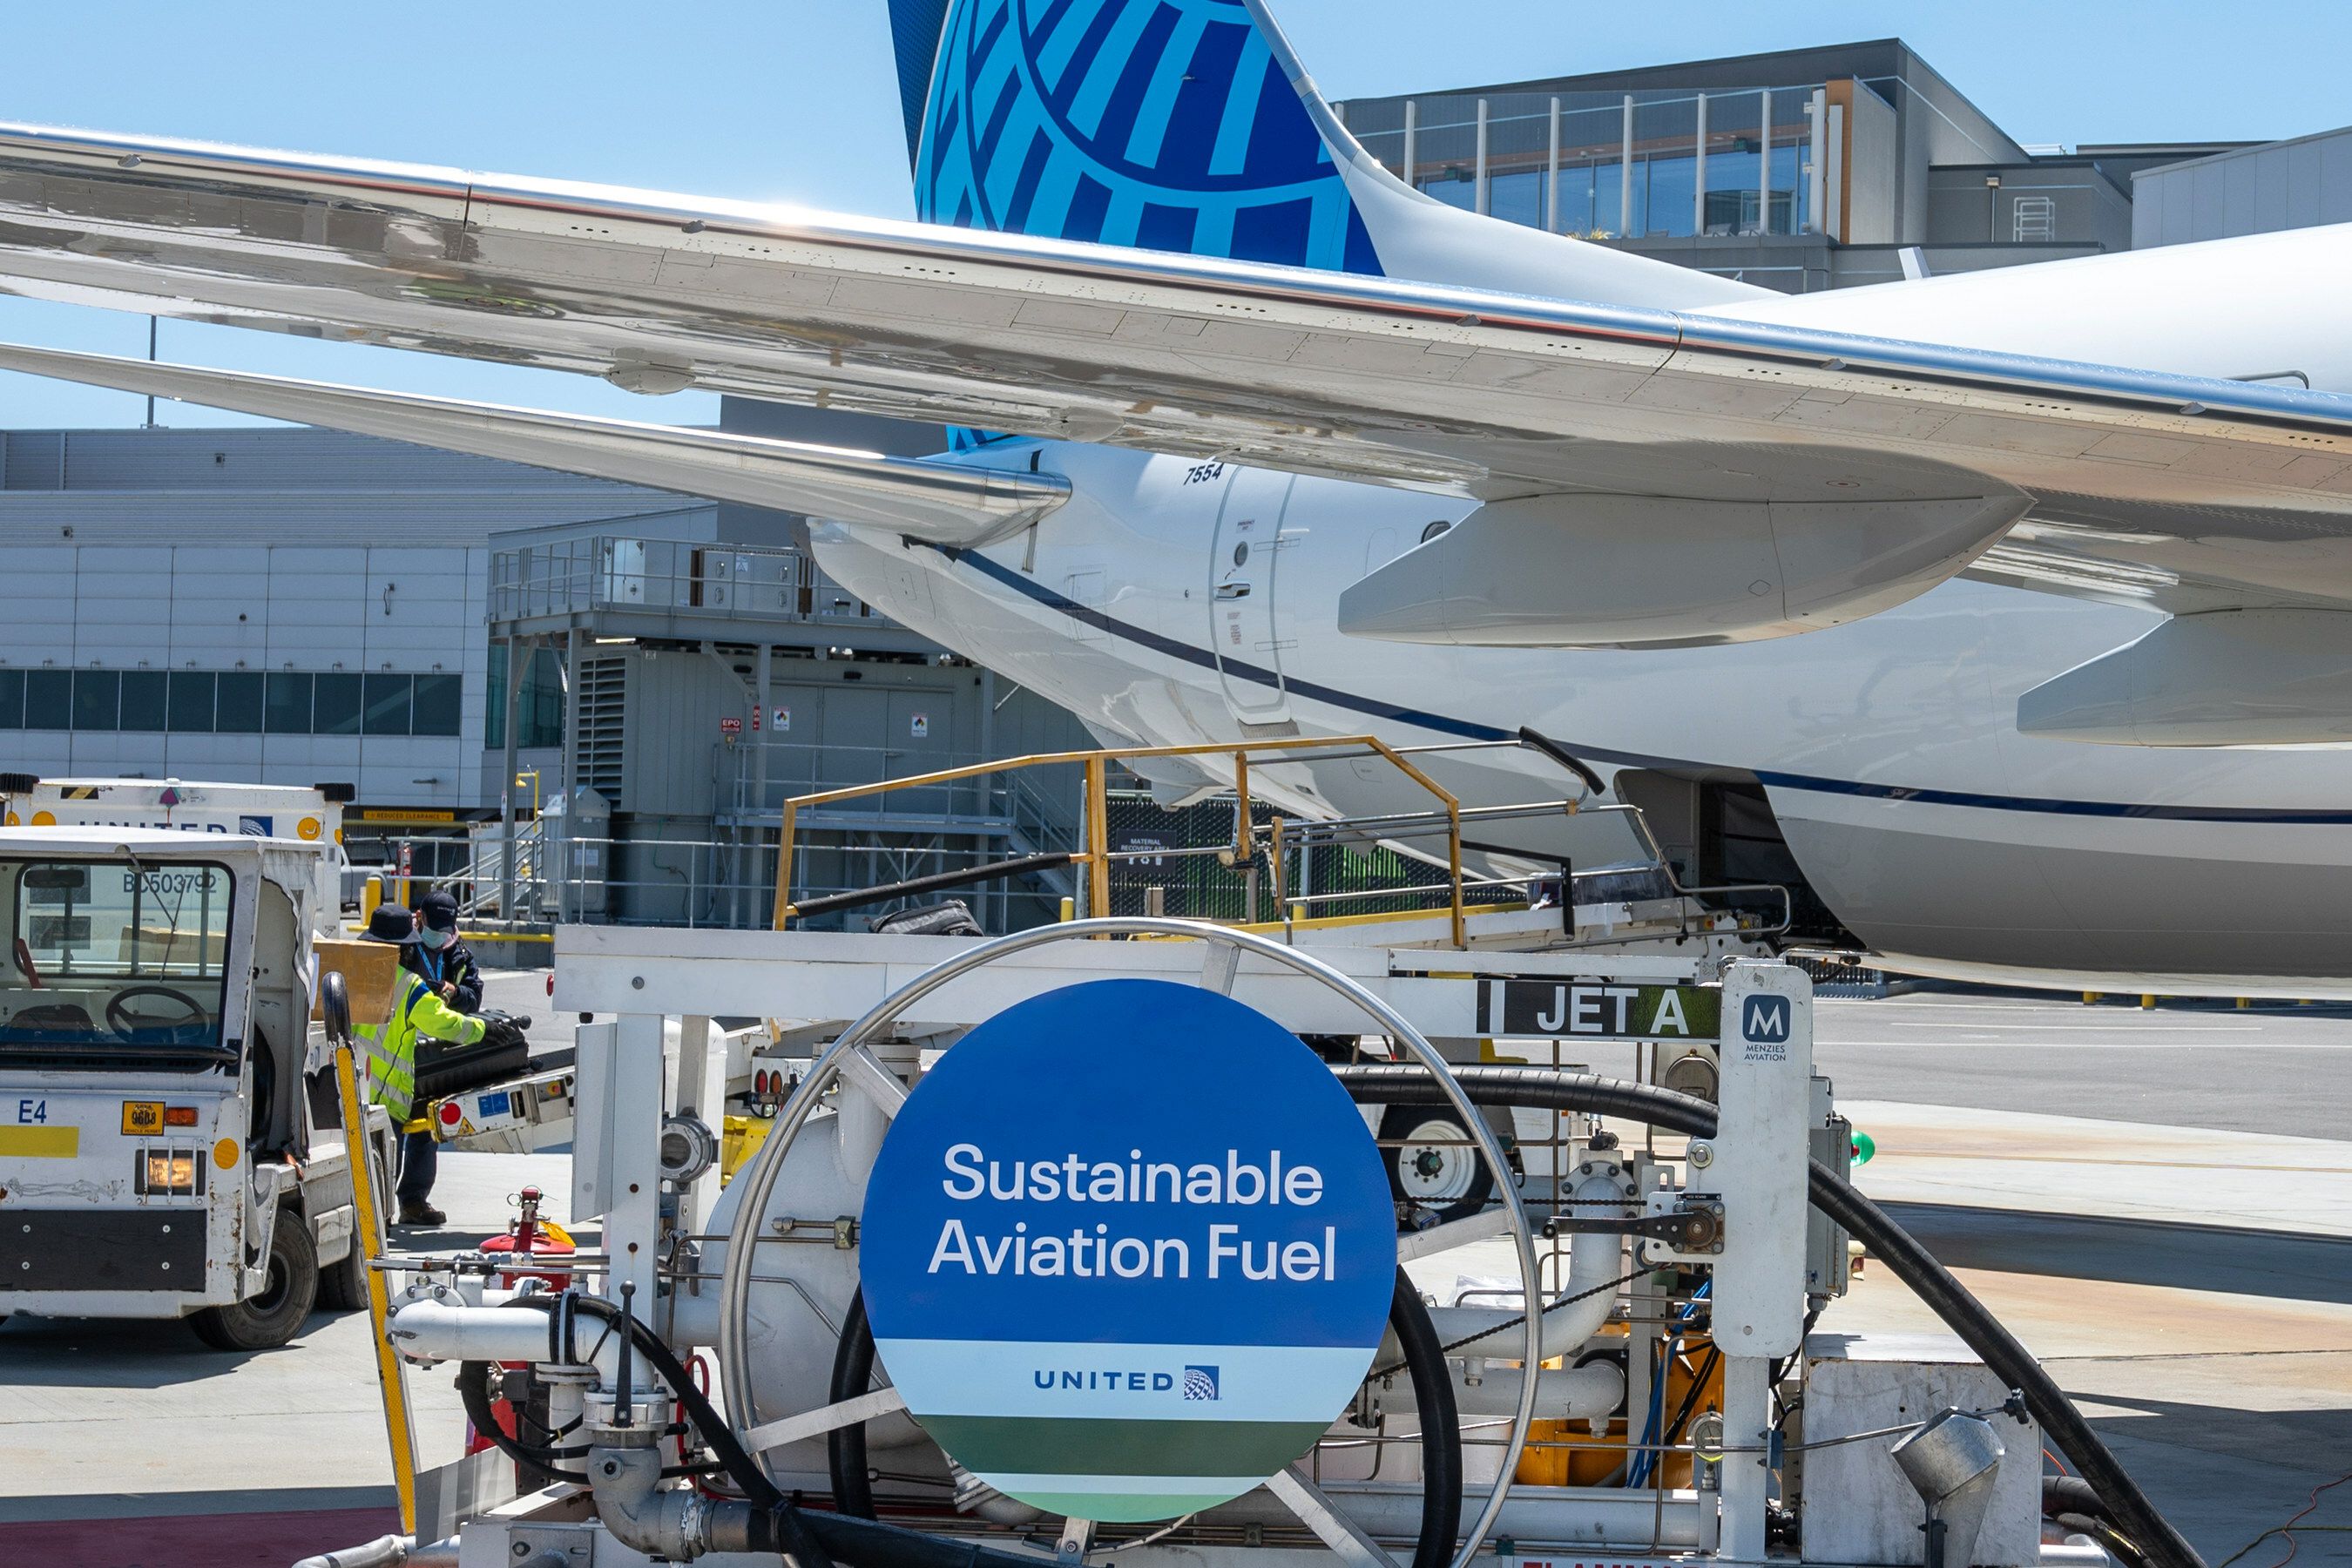 SFF_Newsroom_hero - United Airlines jetliner being fueled with Sustainable Aviation Fuel